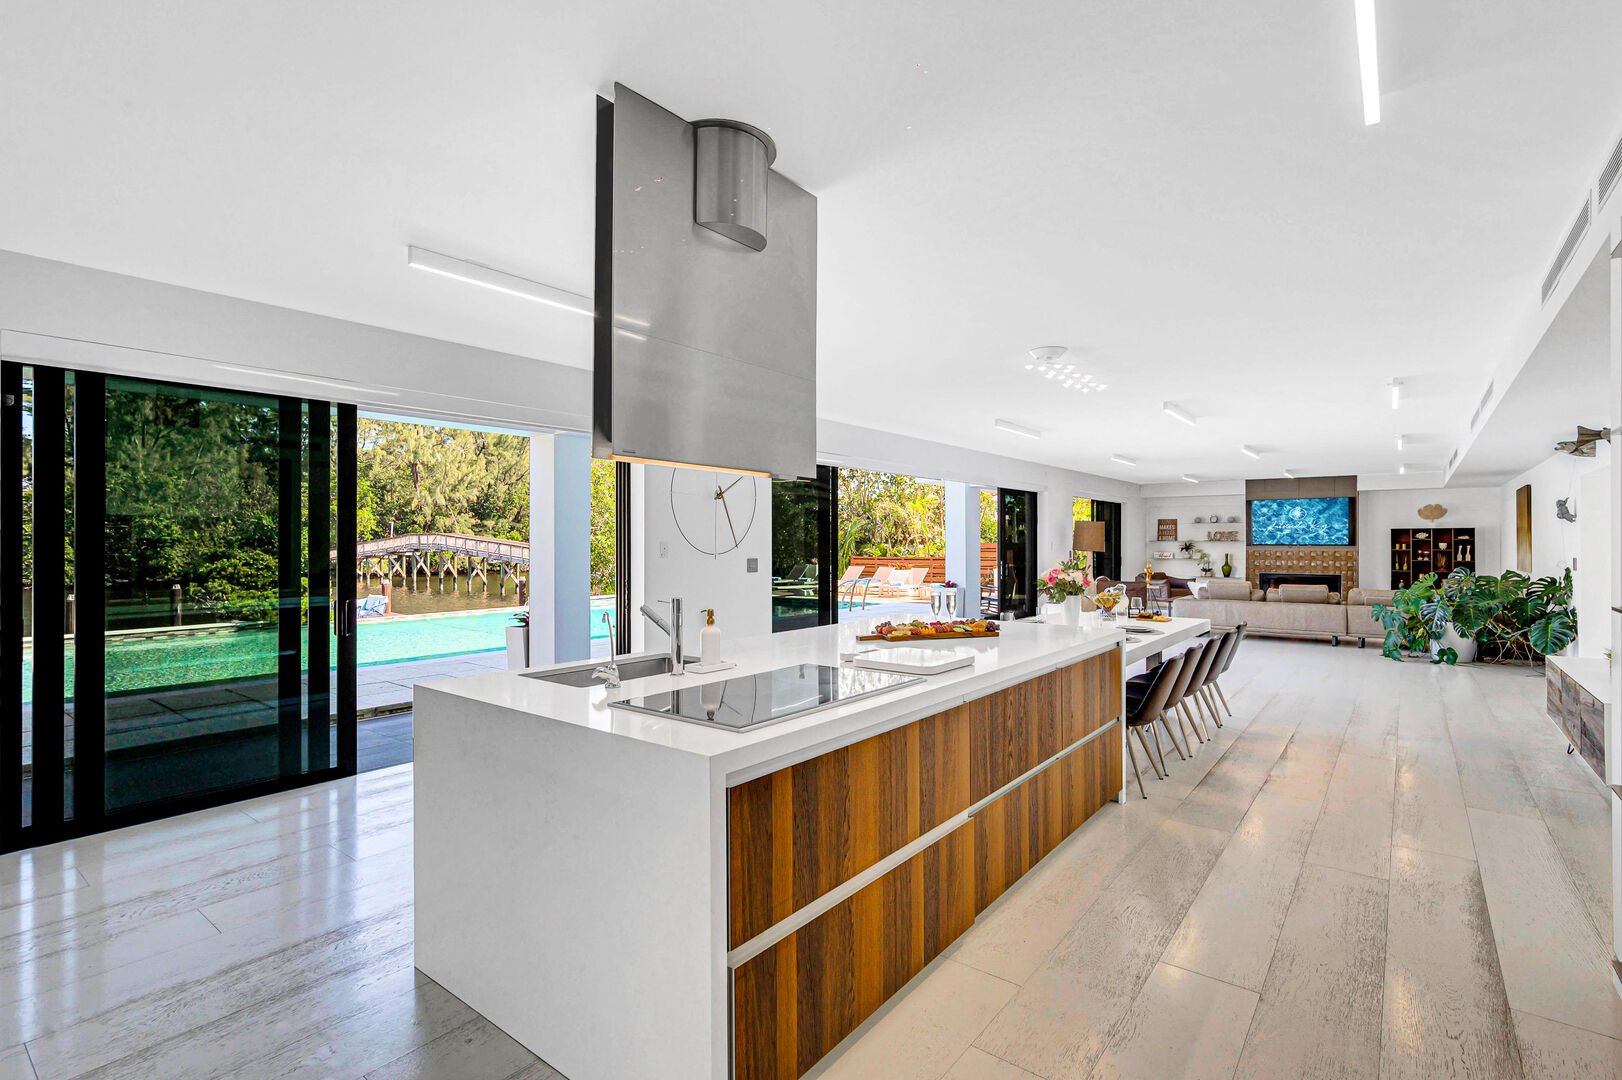 The kitchen is lined with sliding floor-to-ceiling windows, offering waterfront views and seamless access to the pool and outdoor kitchens.